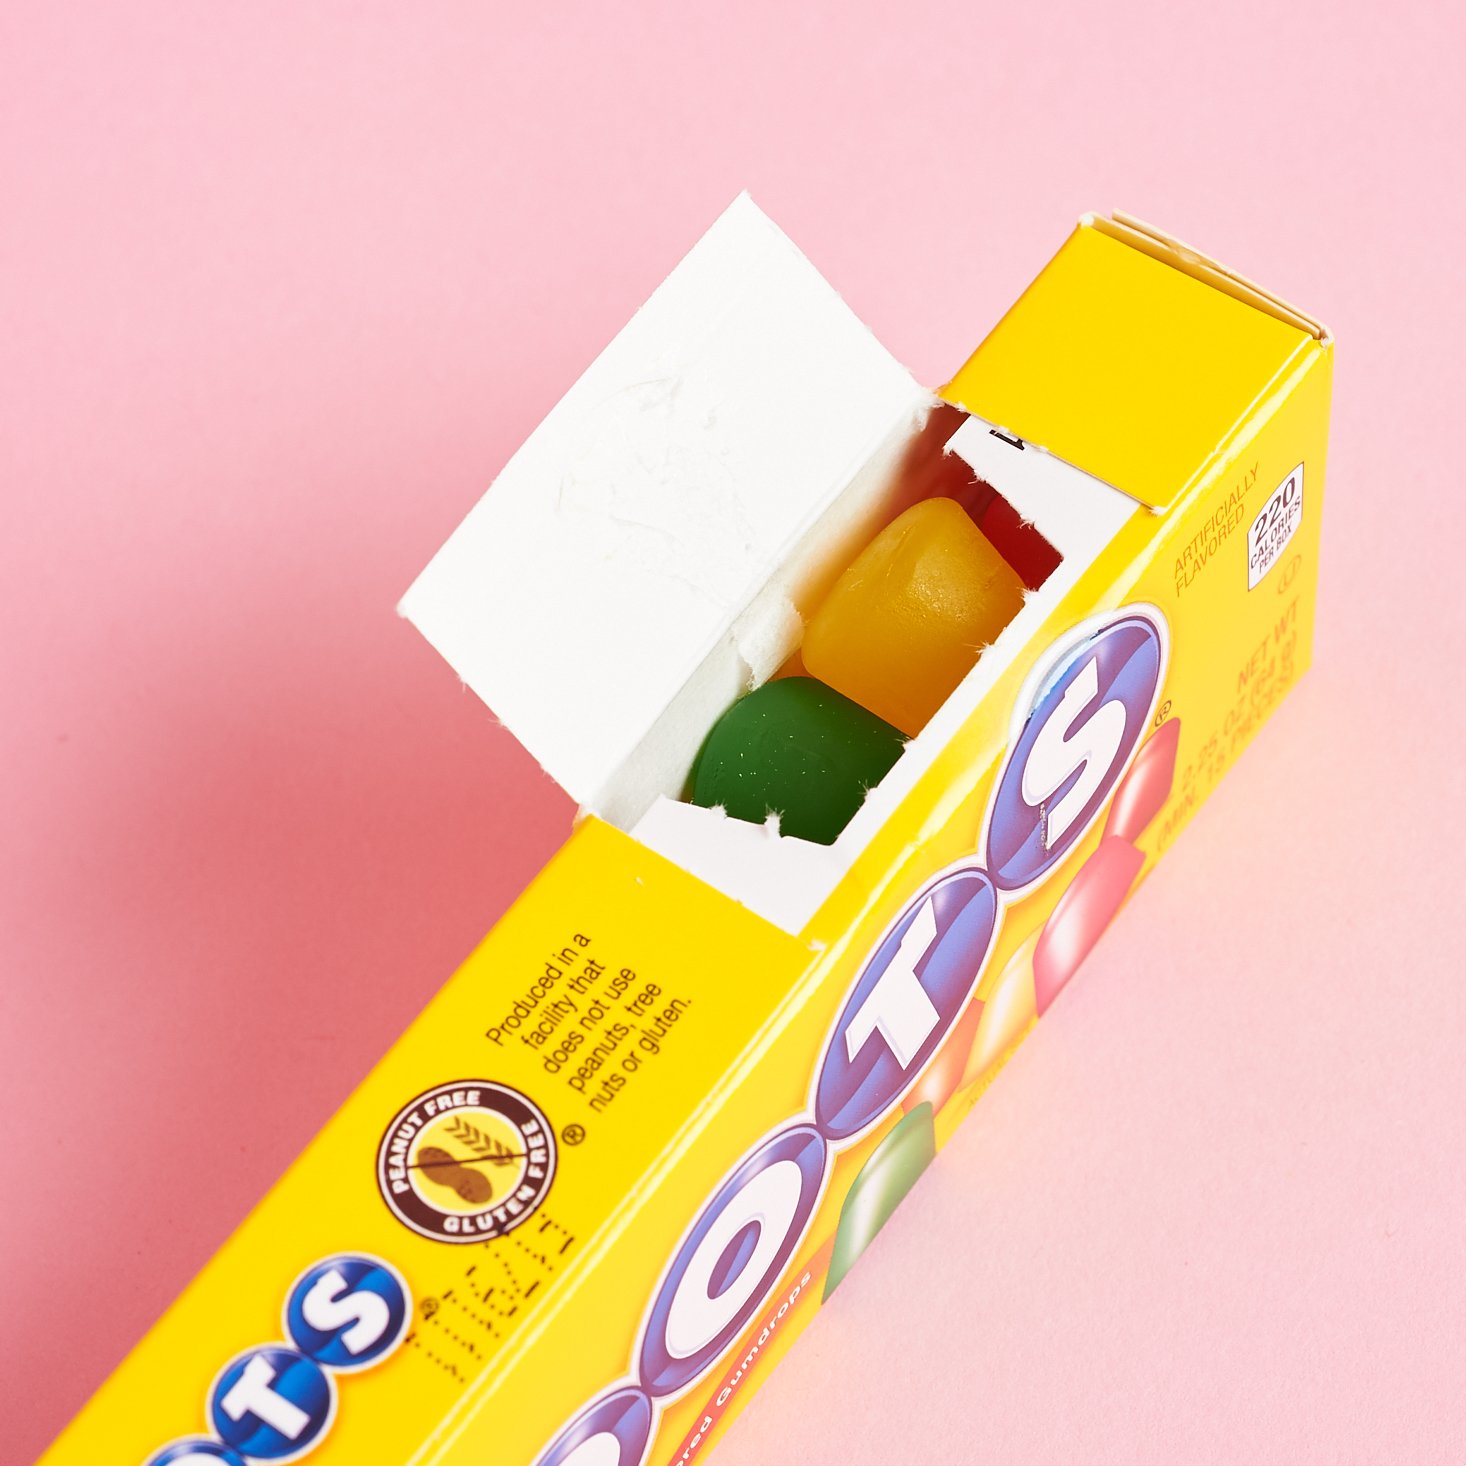 Box of Dots candy- opened